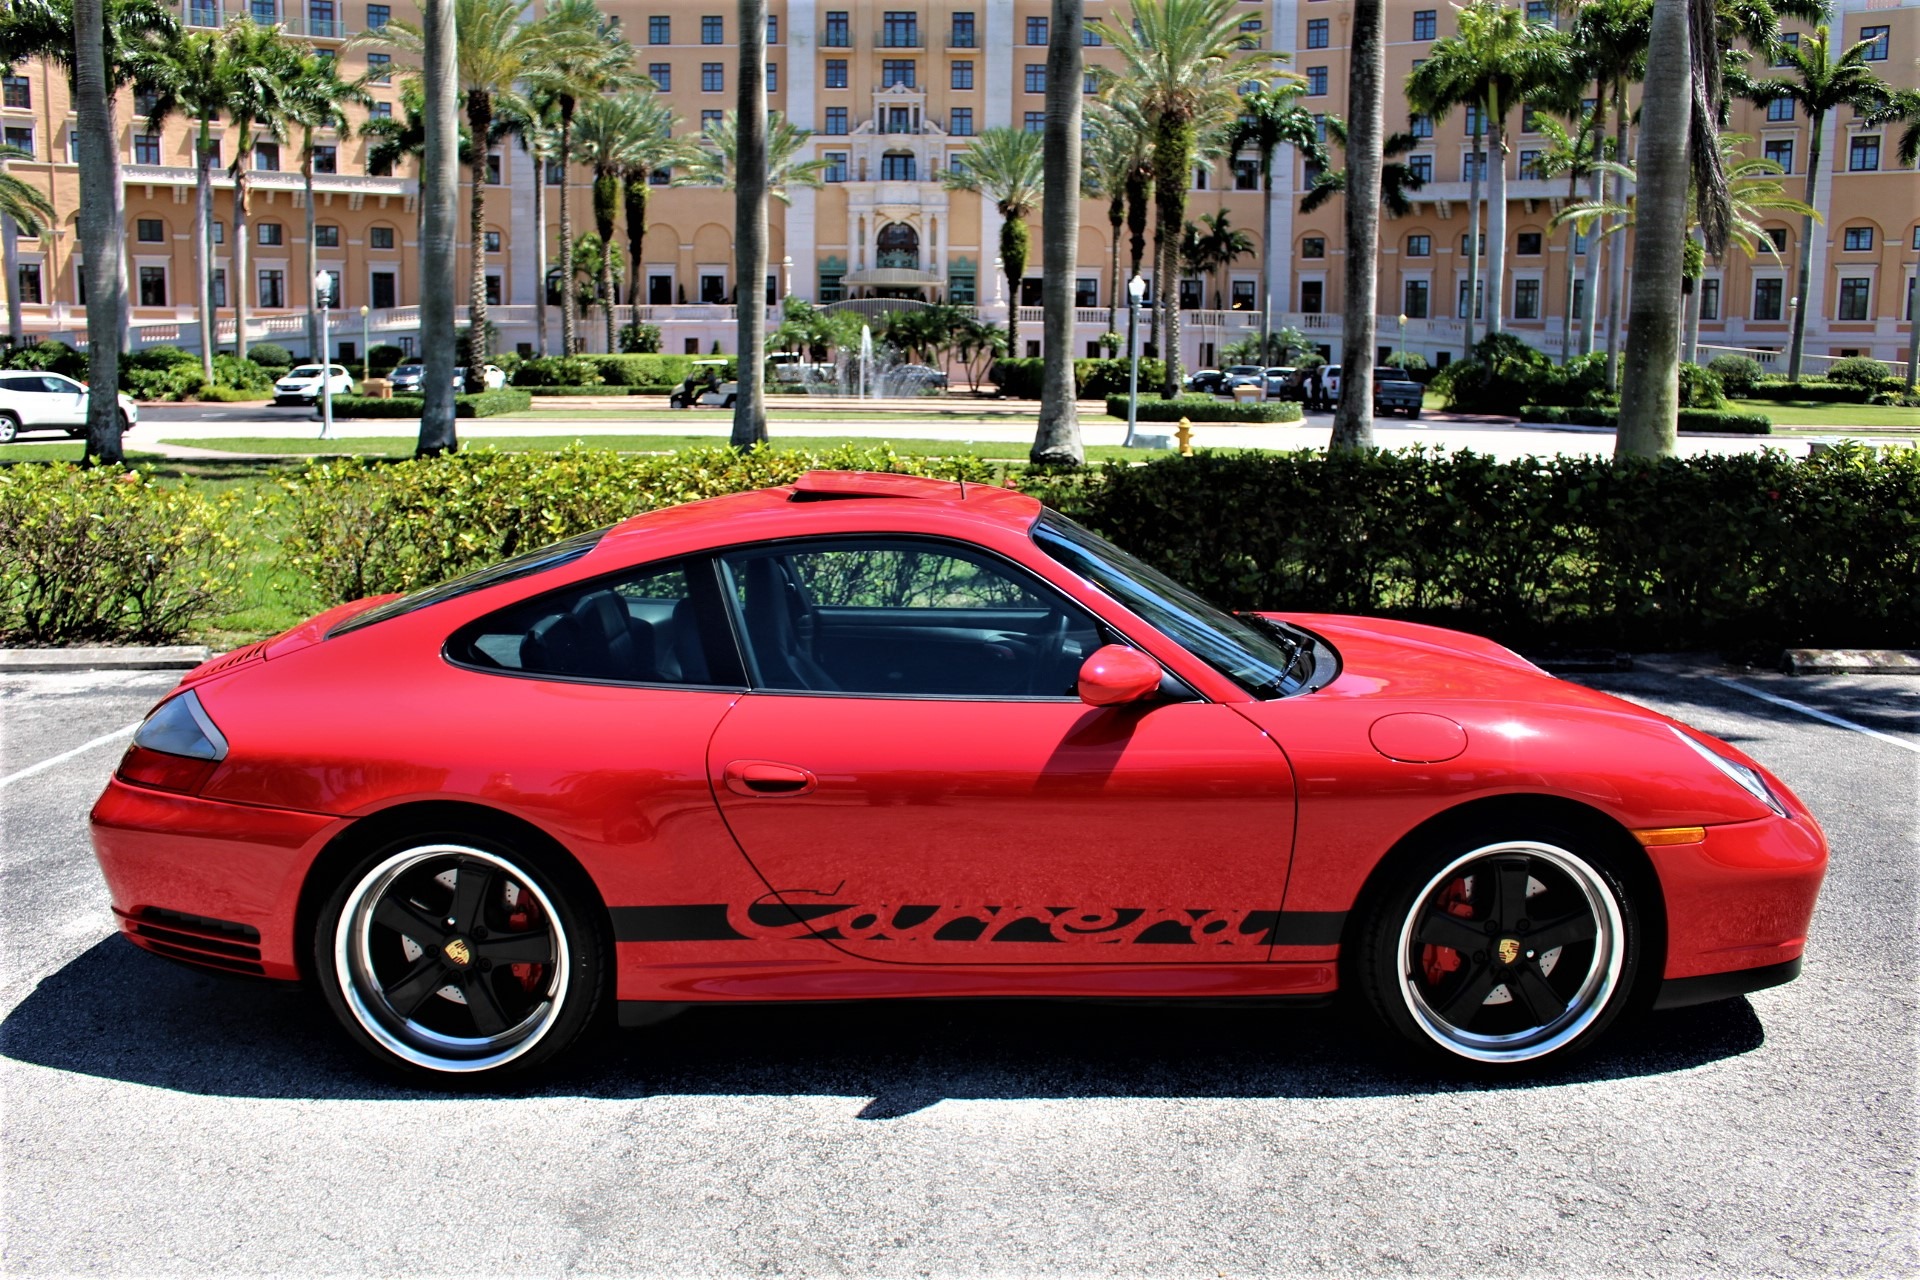 Used 2003 Porsche 911 Carrera 4S for sale Sold at The Gables Sports Cars in Miami FL 33146 3